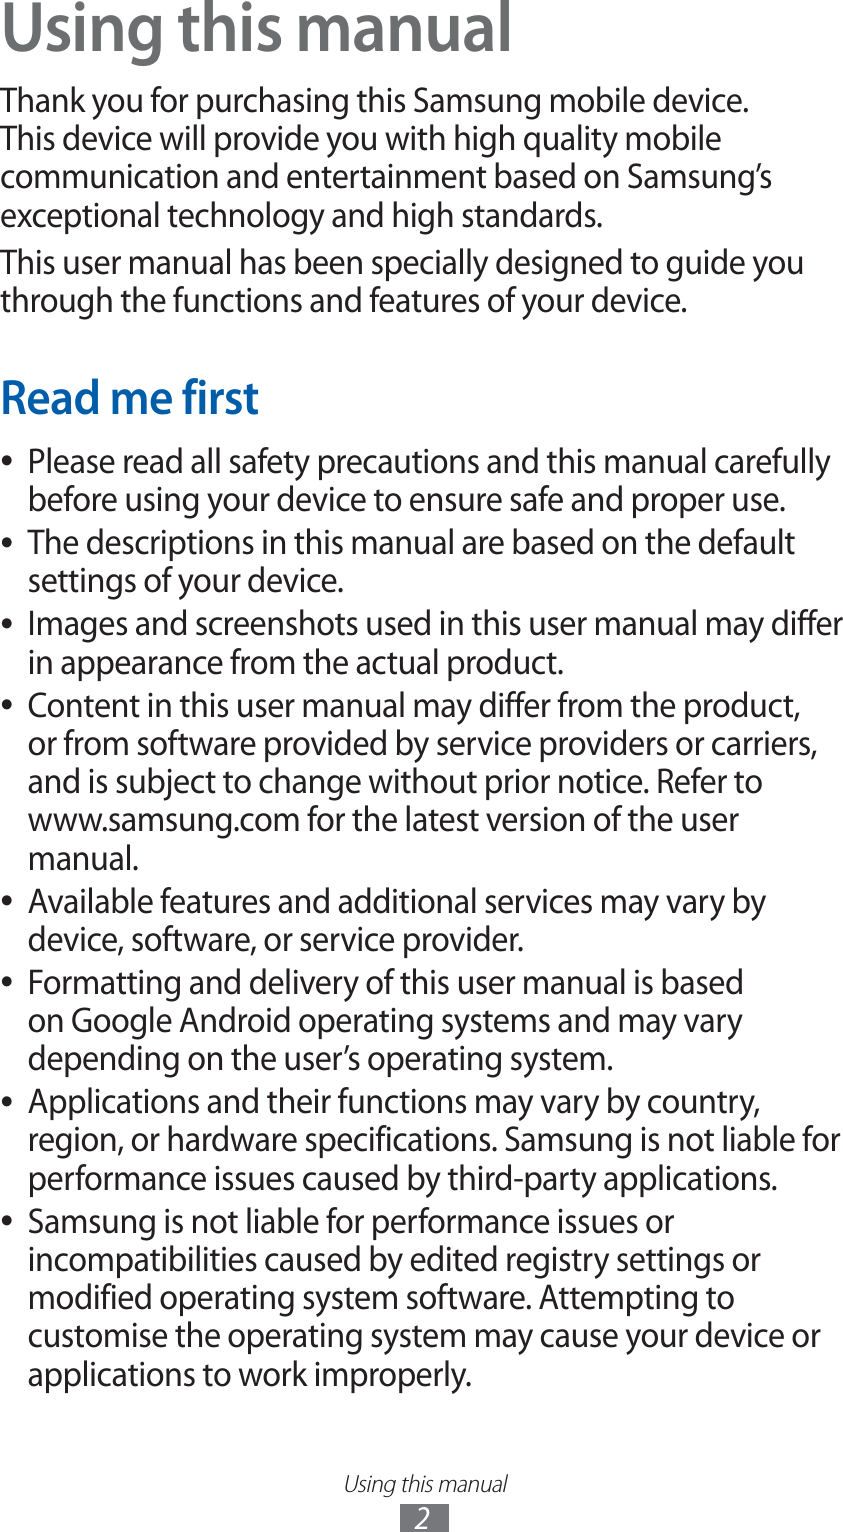 Using this manual2Using this manualThank you for purchasing this Samsung mobile device. This device will provide you with high quality mobile communication and entertainment based on Samsung’s exceptional technology and high standards.This user manual has been specially designed to guide you through the functions and features of your device.Read me firstPlease read all safety precautions and this manual carefully  ●before using your device to ensure safe and proper use.The descriptions in this manual are based on the default  ●settings of your device.Images and screenshots used in this user manual may differ  ●in appearance from the actual product.Content in this user manual may differ from the product,  ●or from software provided by service providers or carriers, and is subject to change without prior notice. Refer to www.samsung.com for the latest version of the user manual.Available features and additional services may vary by  ●device, software, or service provider.Formatting and delivery of this user manual is based  ●on Google Android operating systems and may vary depending on the user’s operating system.Applications and their functions may vary by country,  ●region, or hardware specifications. Samsung is not liable for performance issues caused by third-party applications.Samsung is not liable for performance issues or  ●incompatibilities caused by edited registry settings or modified operating system software. Attempting to customise the operating system may cause your device or applications to work improperly.